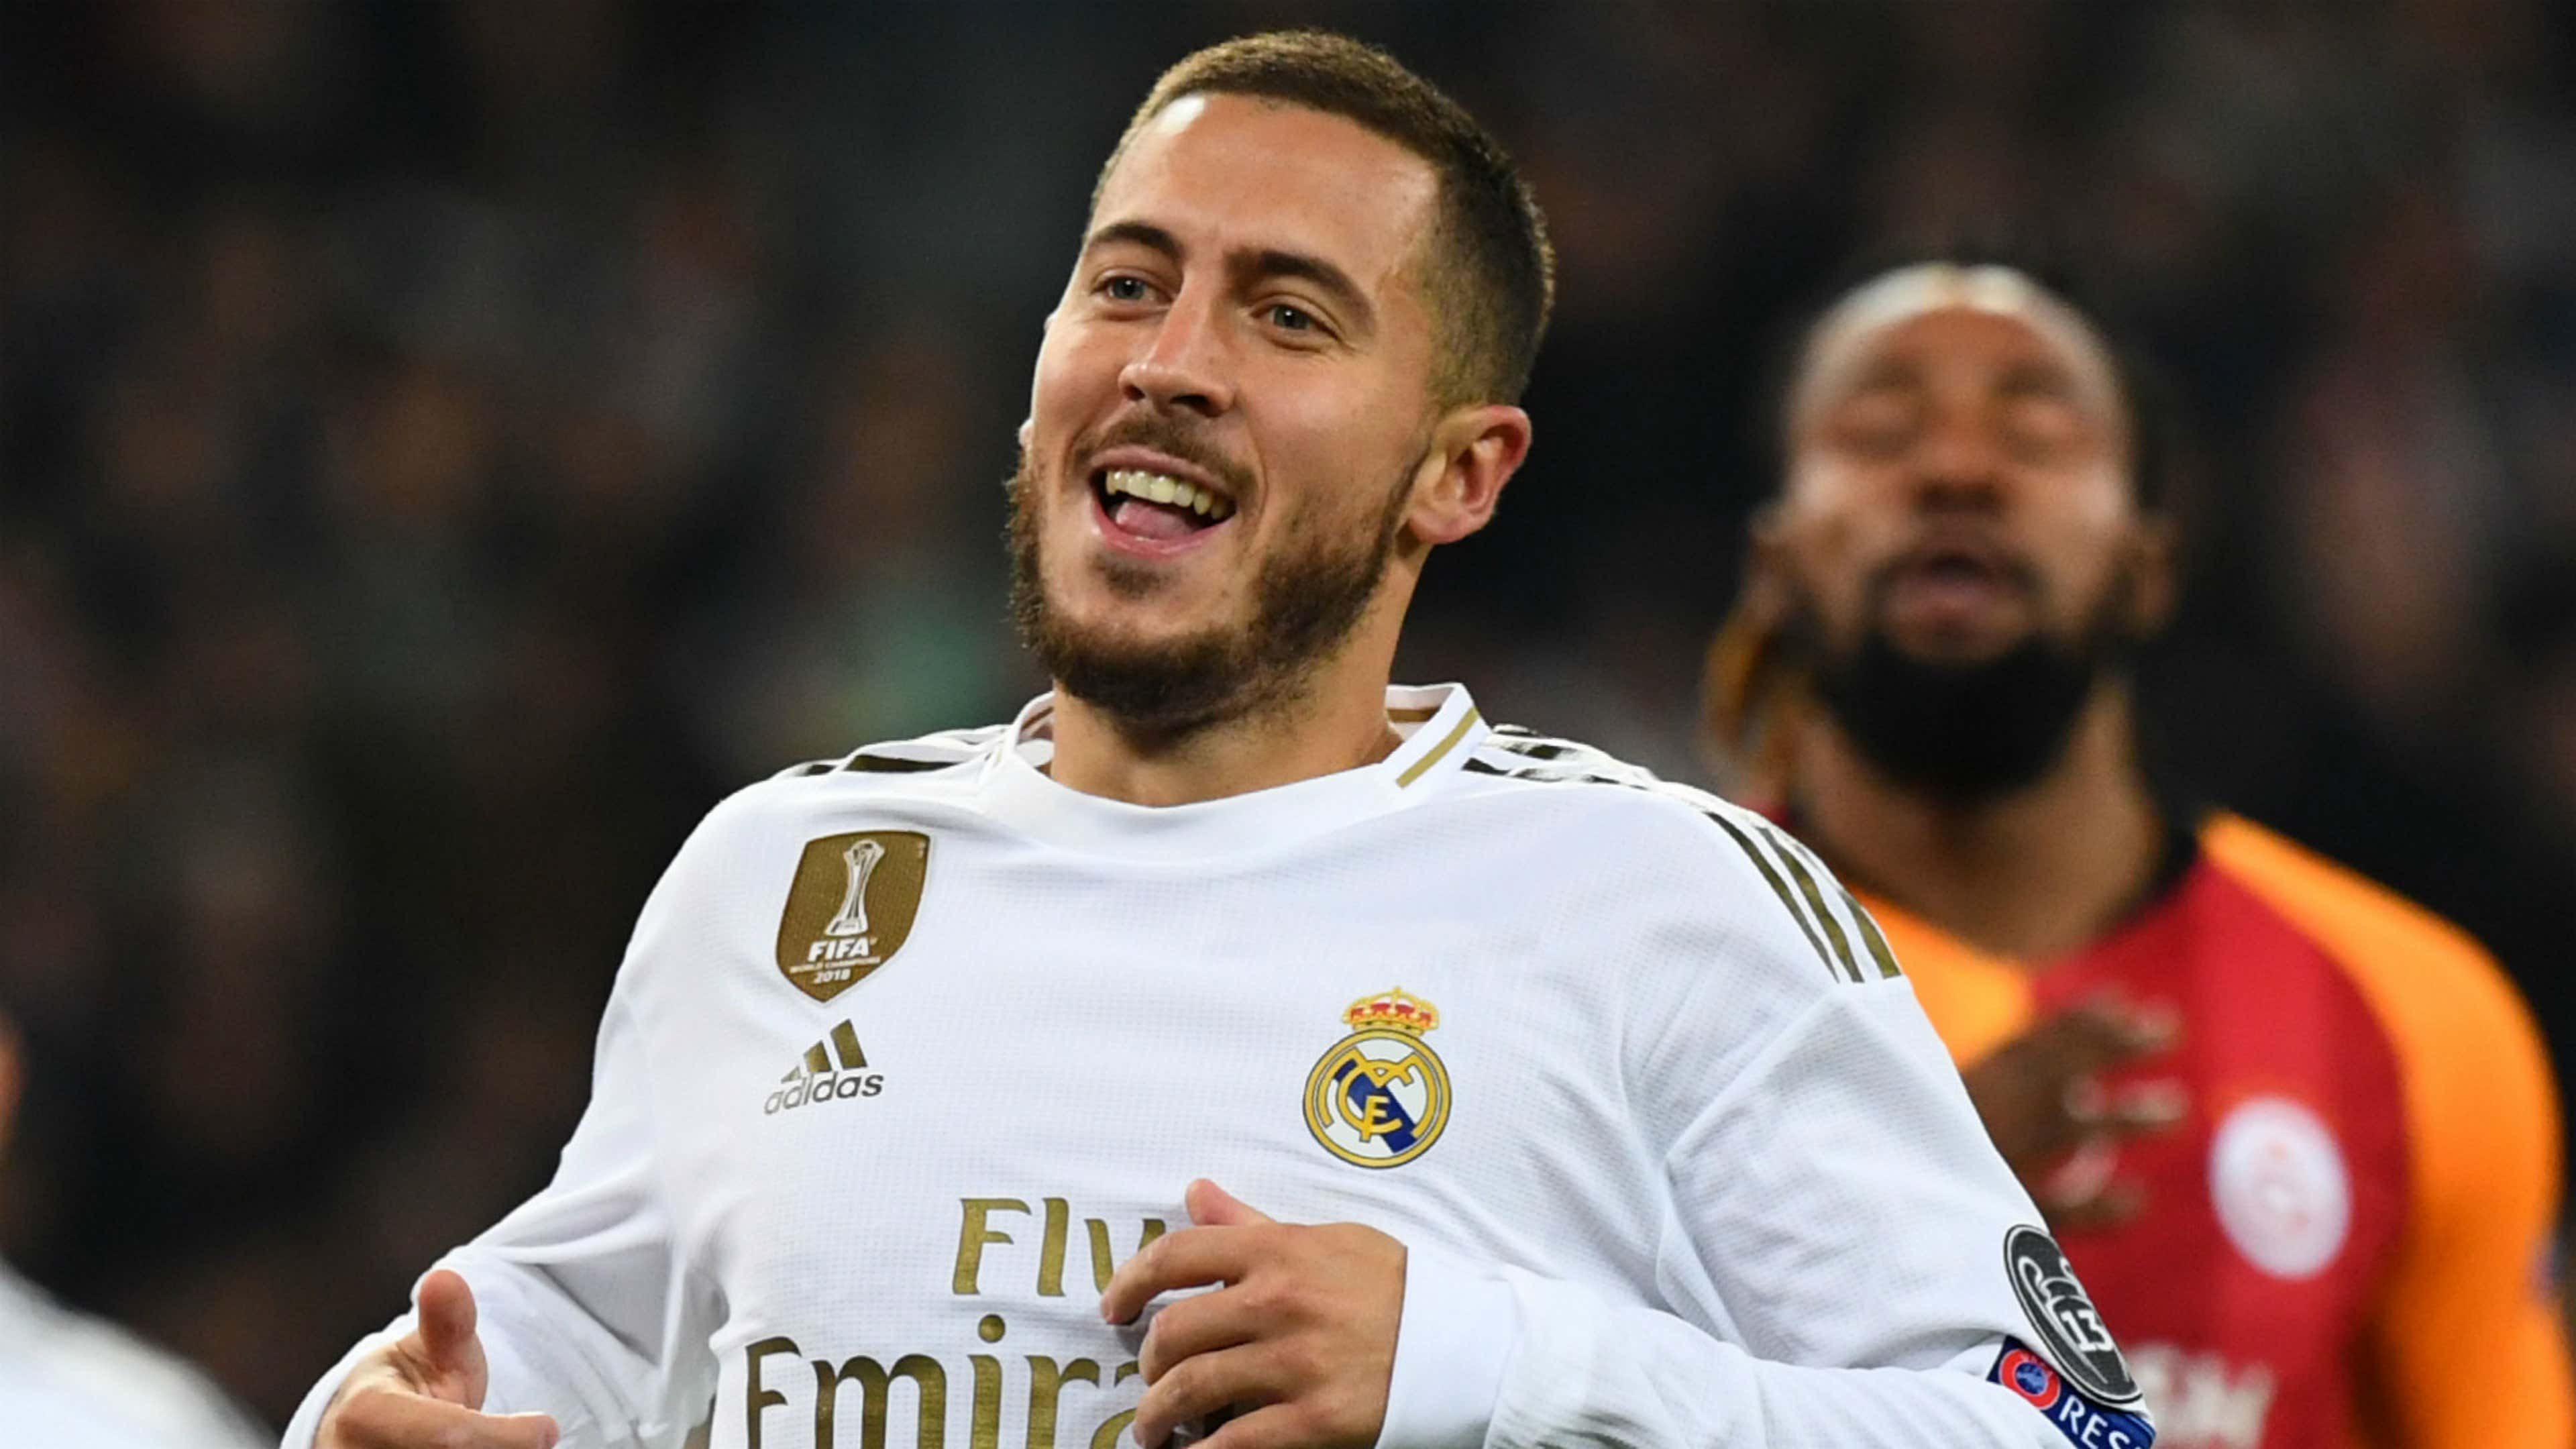 From Kopa to Hazard: A history of Real Madrid's number seven